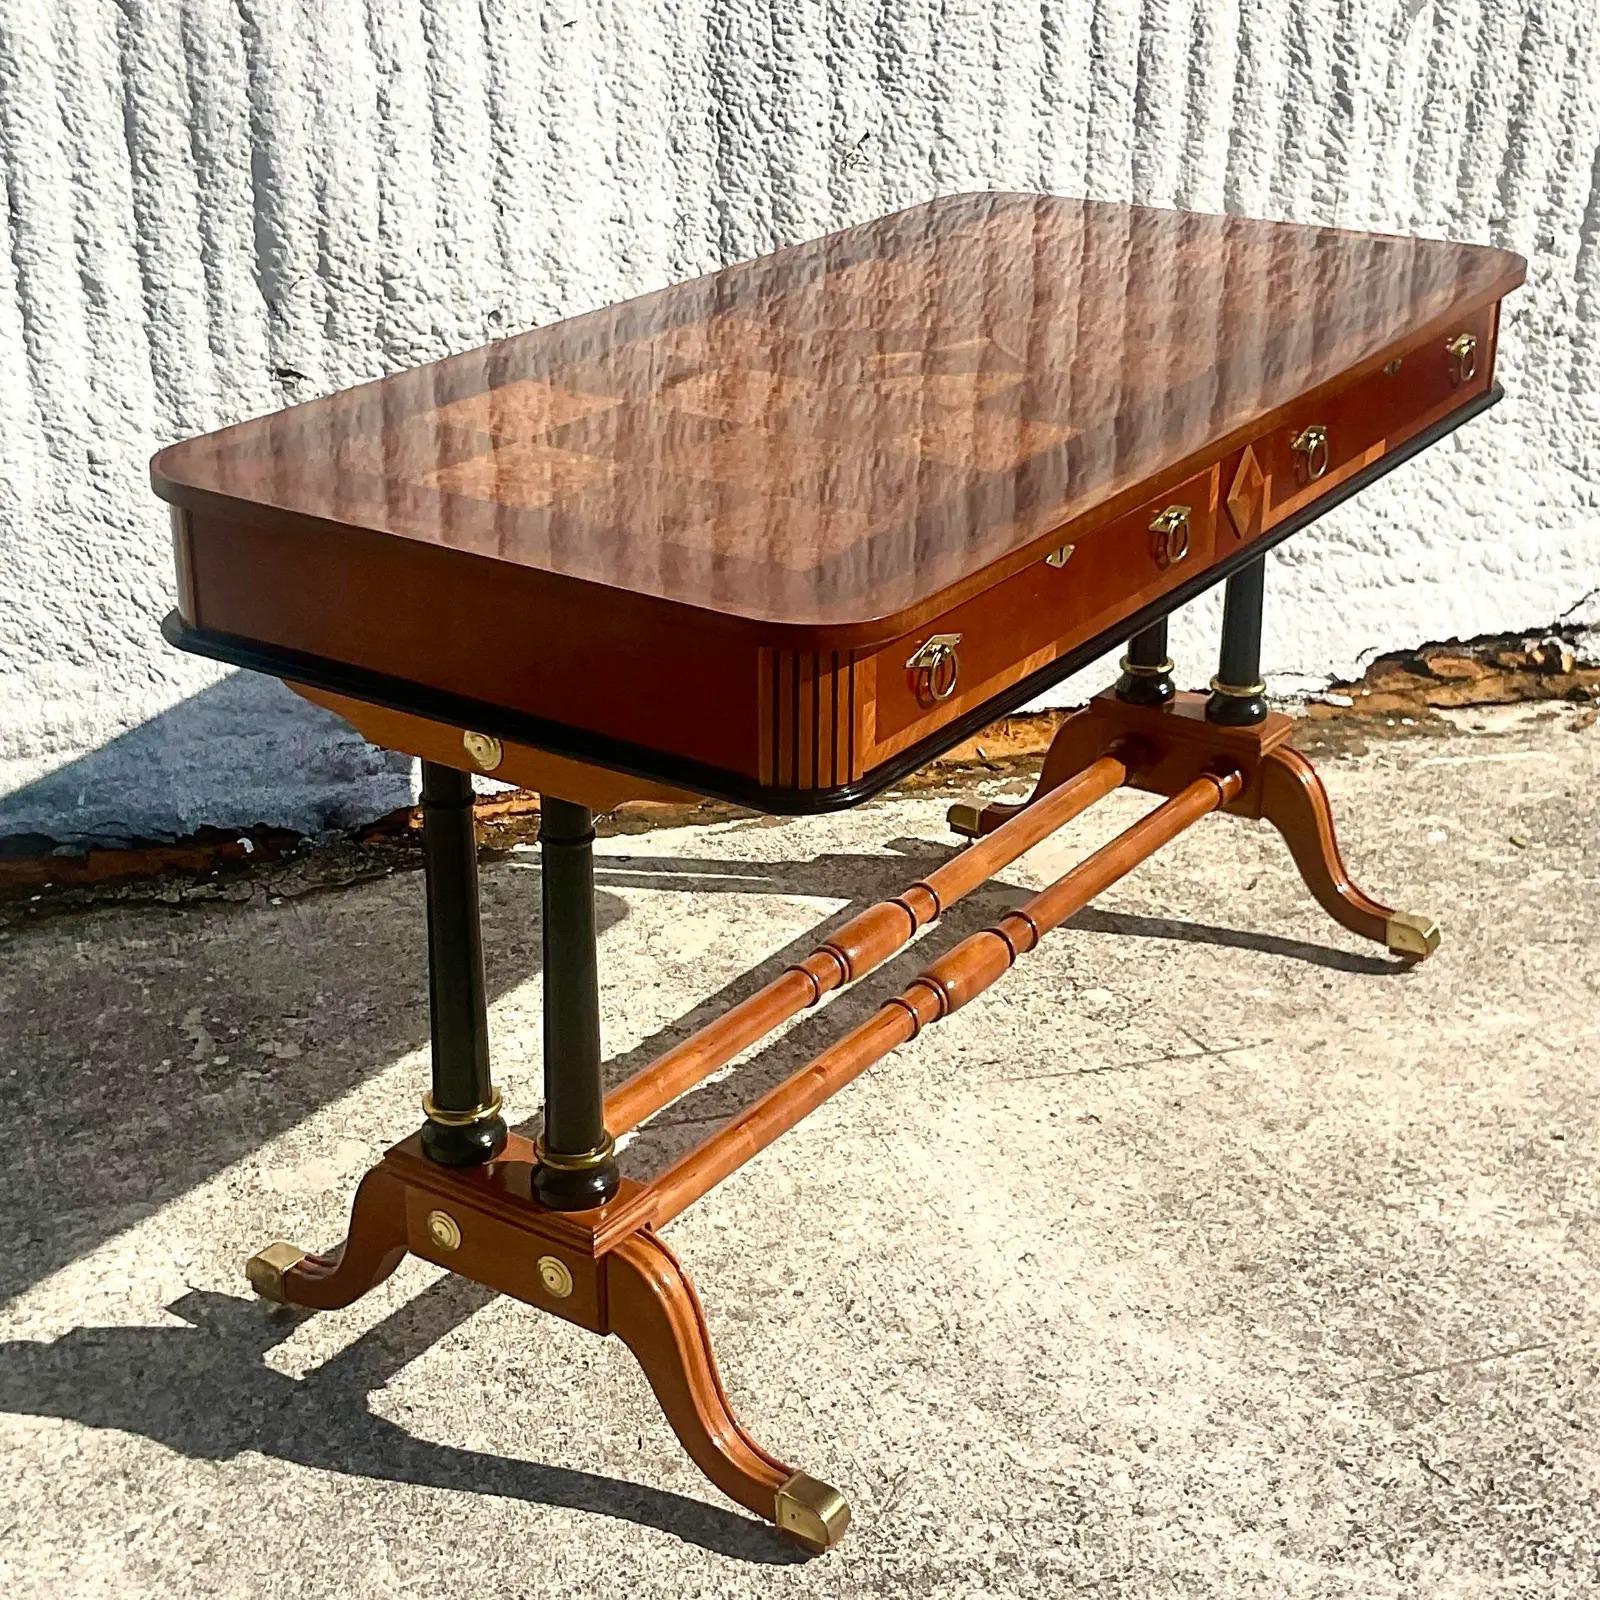 Vintage Regency empire writing desk. Beautiful marquetry top with beautiful wood grain detail. Acquired from a Palm Beach estate.